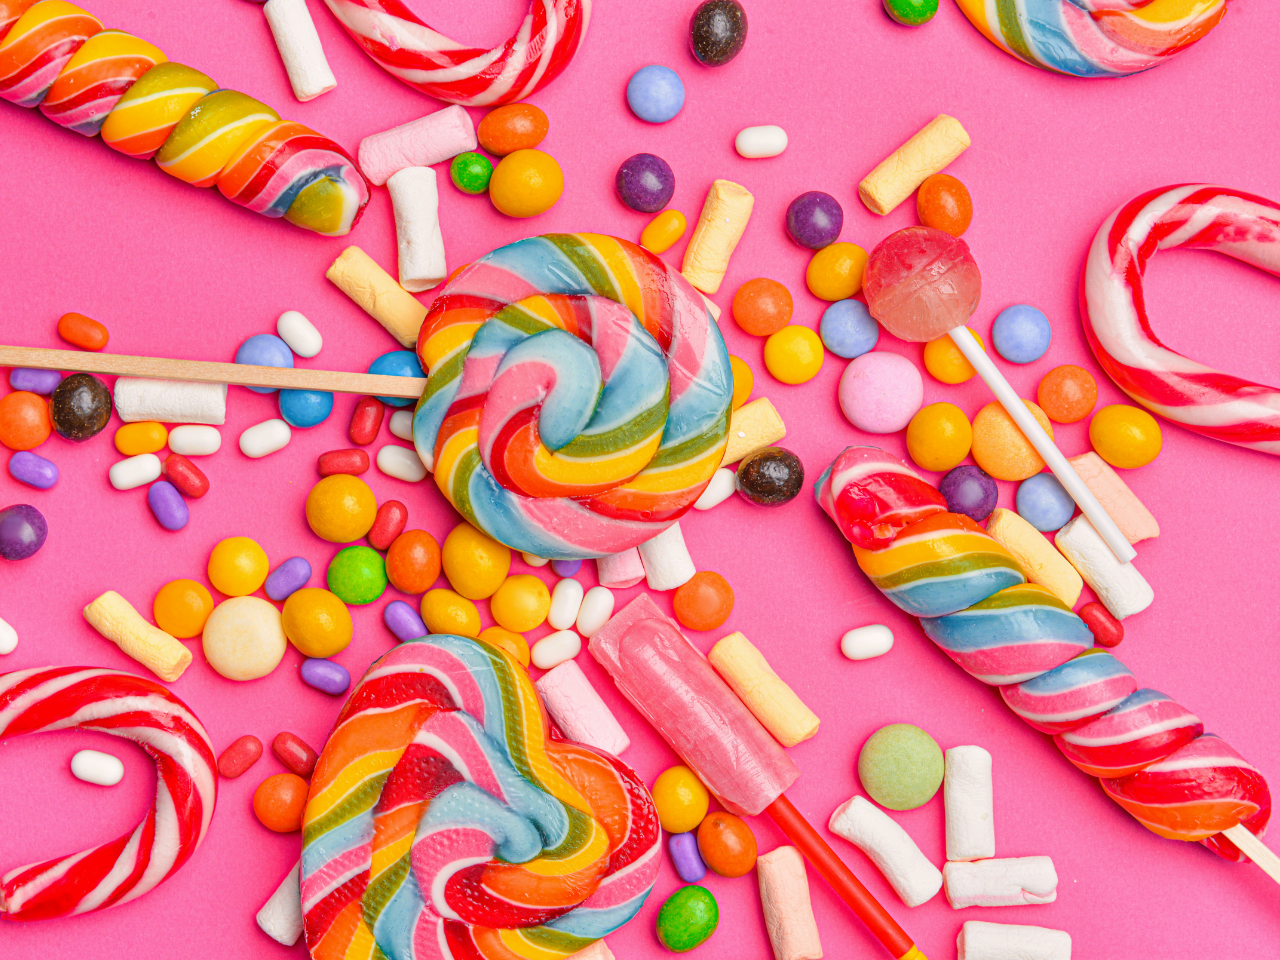 Colourful sweets such as candy canes, lollipops, jellybeans, and marshmallows spread out over a pink, flat surface